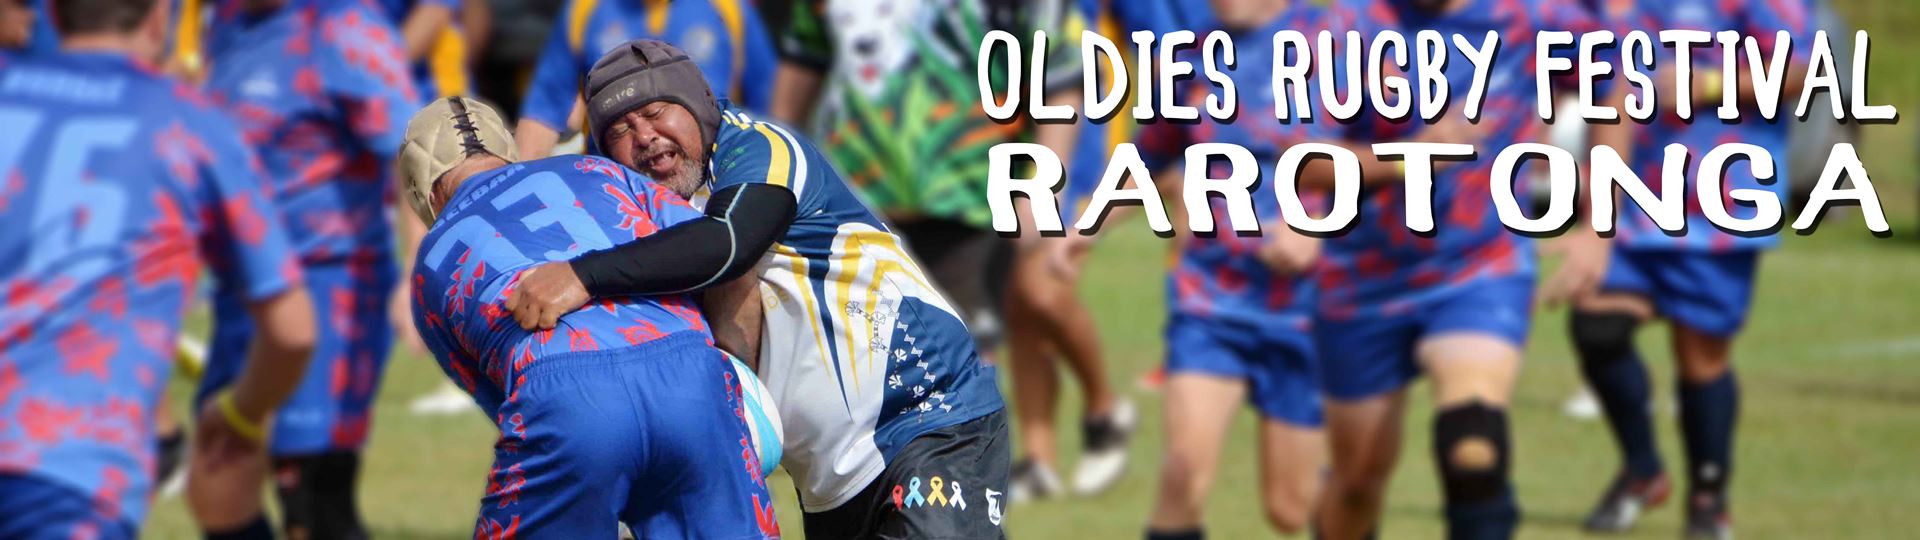 Cook Islands Golden Oldies Rugby Festival Rarotonga